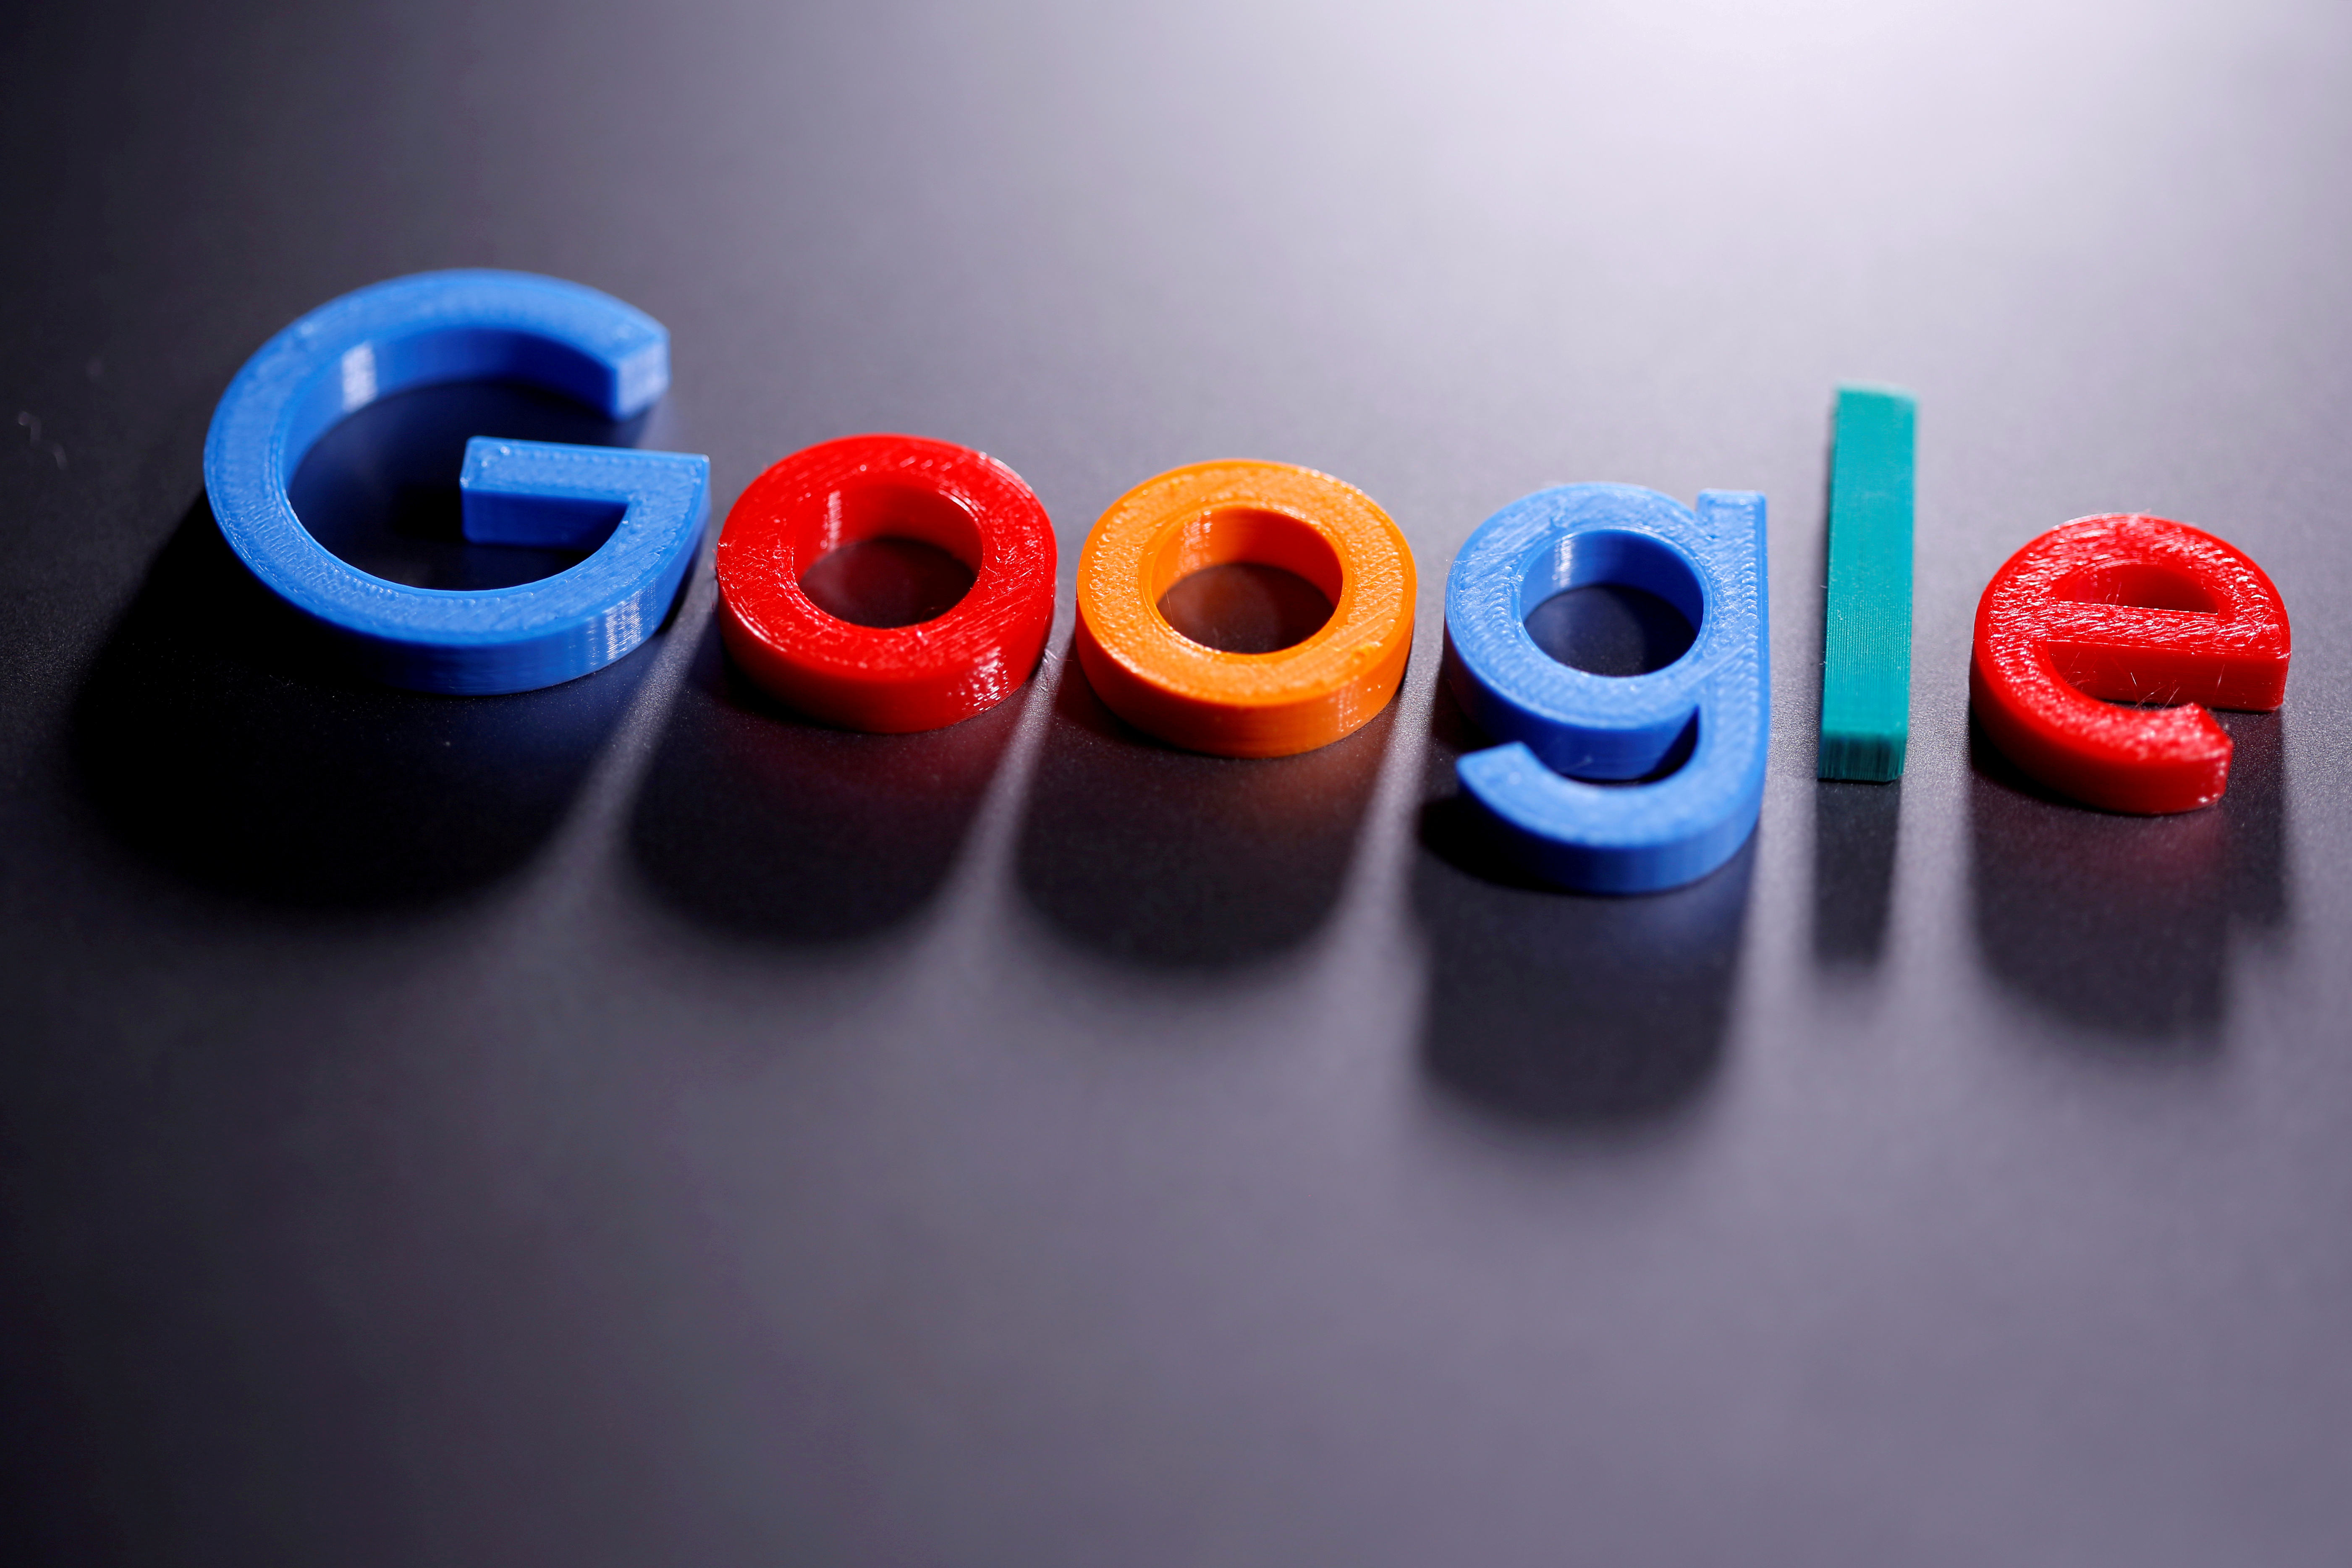 A 3D printed Google logo is seen in this illustration